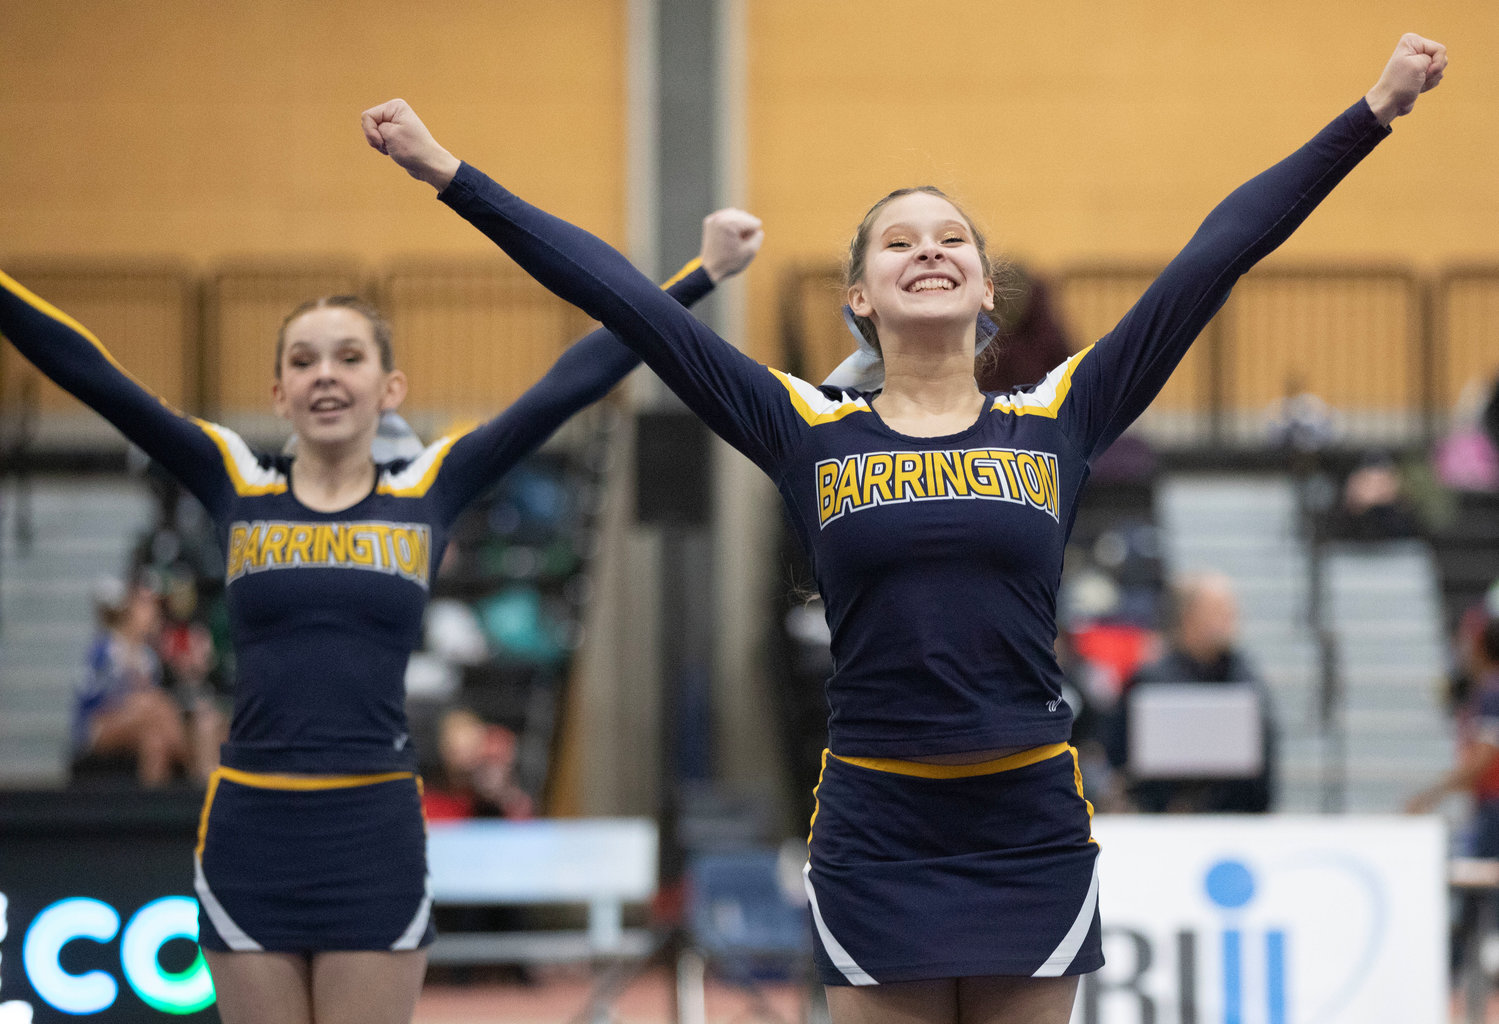 Sarah Simon (right) and Morgane Seadale (left) lead a cheer at the Rhode Island Interscholastic League Division II Cheer Competition.